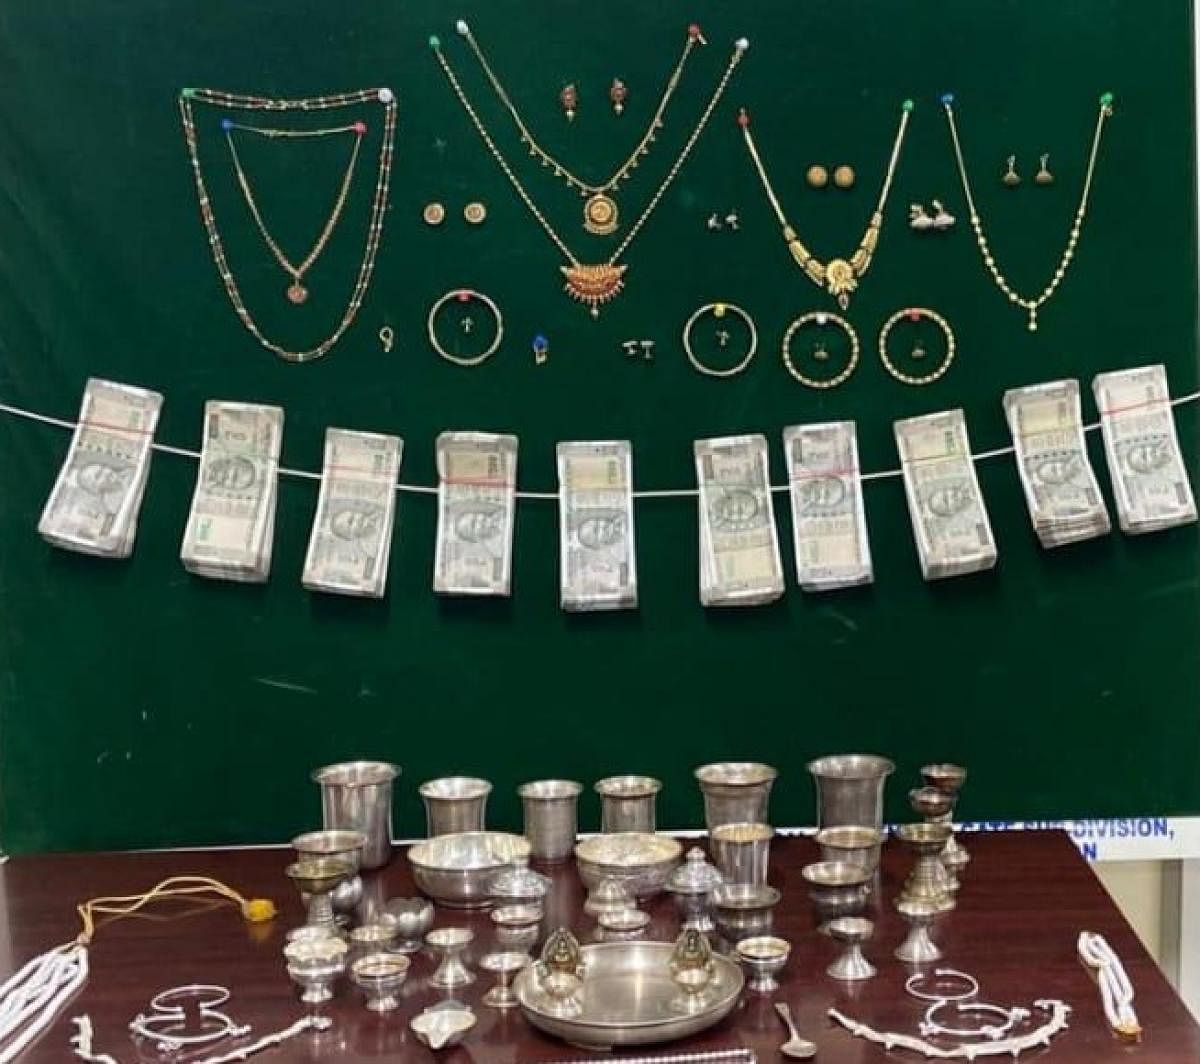 The booty recovered from the accused, Umadevi. The stolen valuables are valued at Rs 15 lakh. These include 230 grams of gold jewellery, 750 grams of silver articles and Rs 5 lakh in cash. Credit: Special arrangement